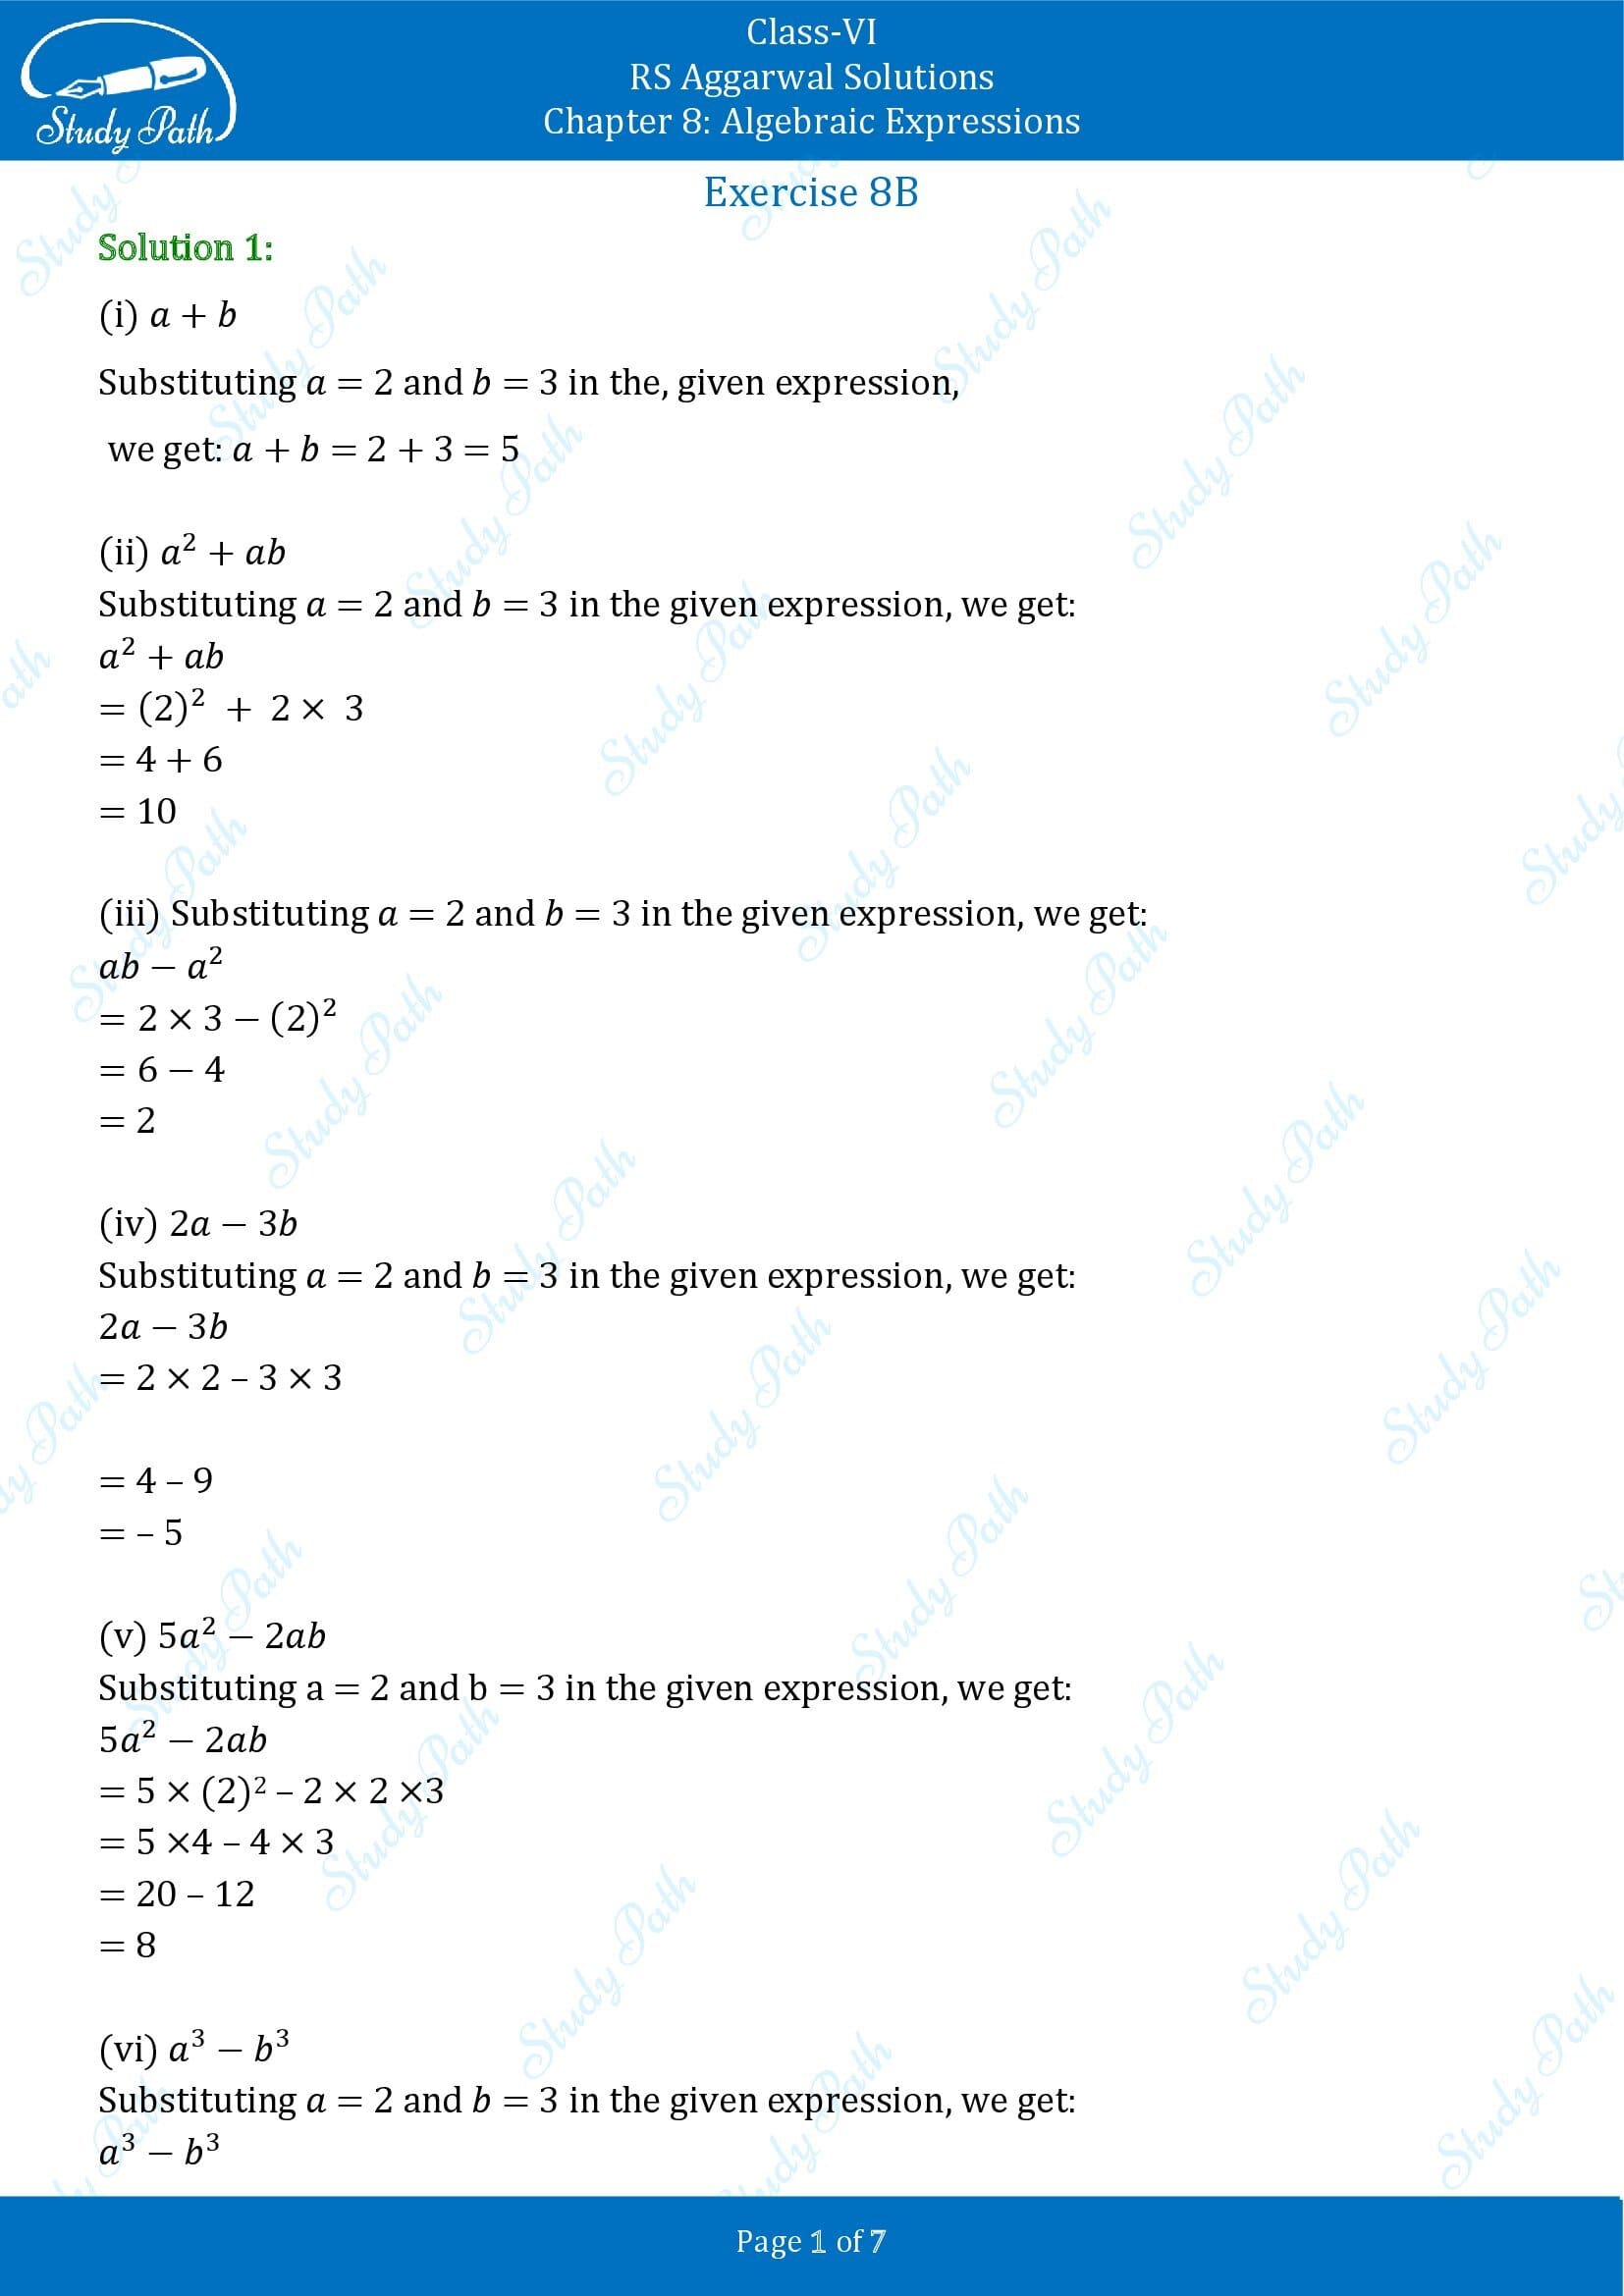 RS Aggarwal Solutions Class 6 Chapter 8 Algebraic Expressions Exercise 8B 0001